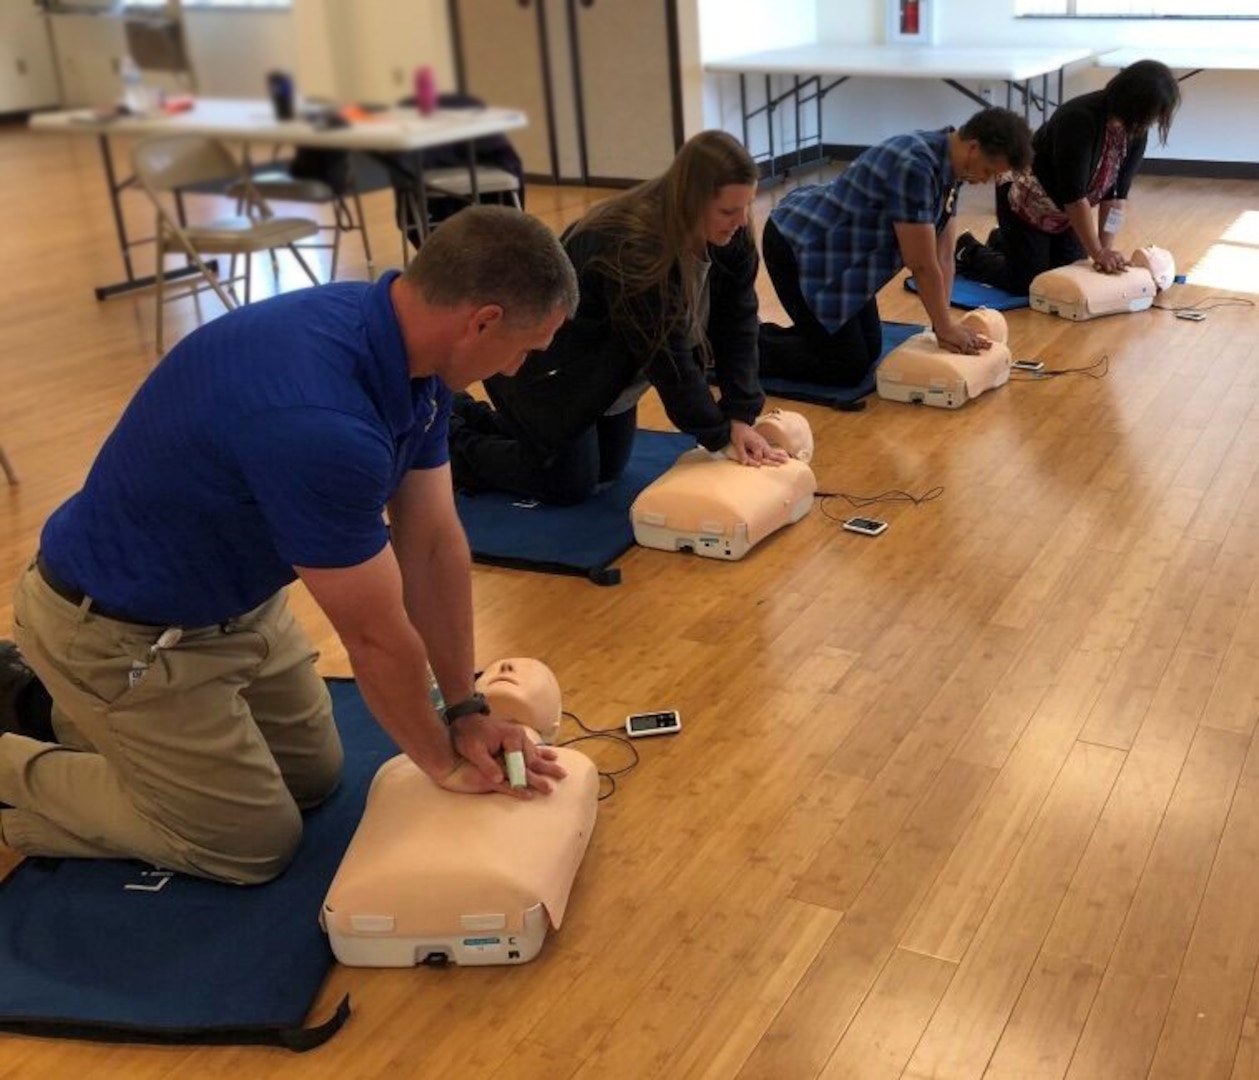 Four class members practice CPR compressions on training body.